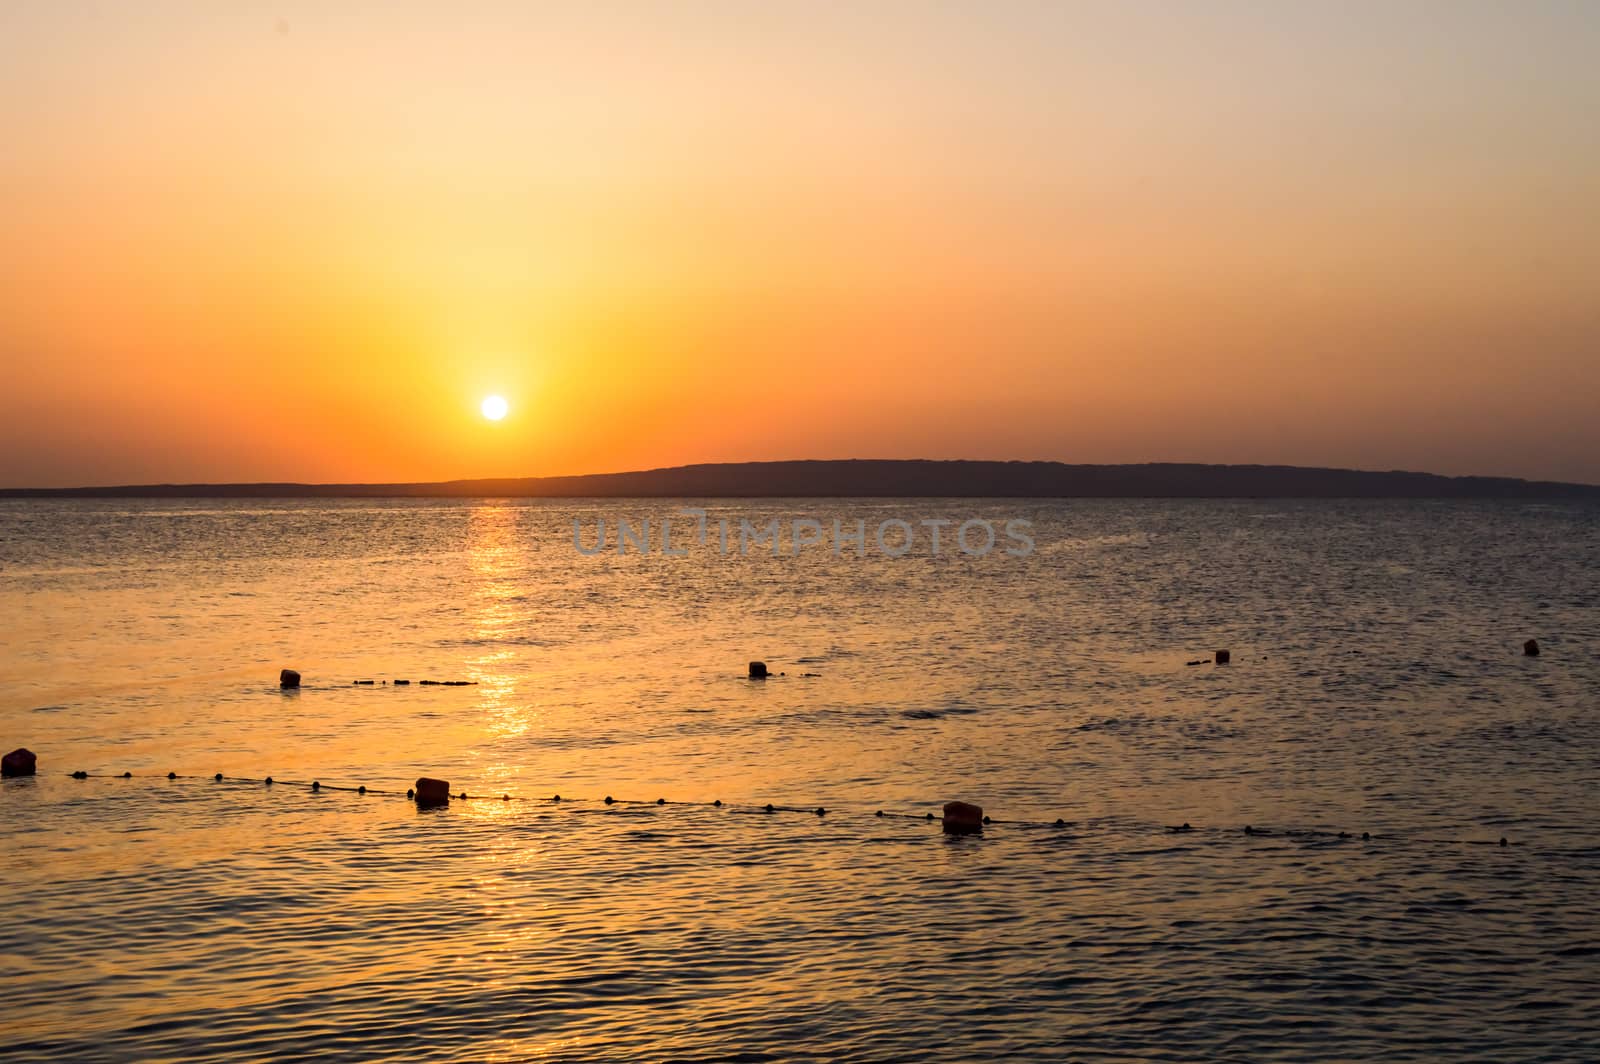 Sunset over the Red Sea seen from a hotel by Philou1000